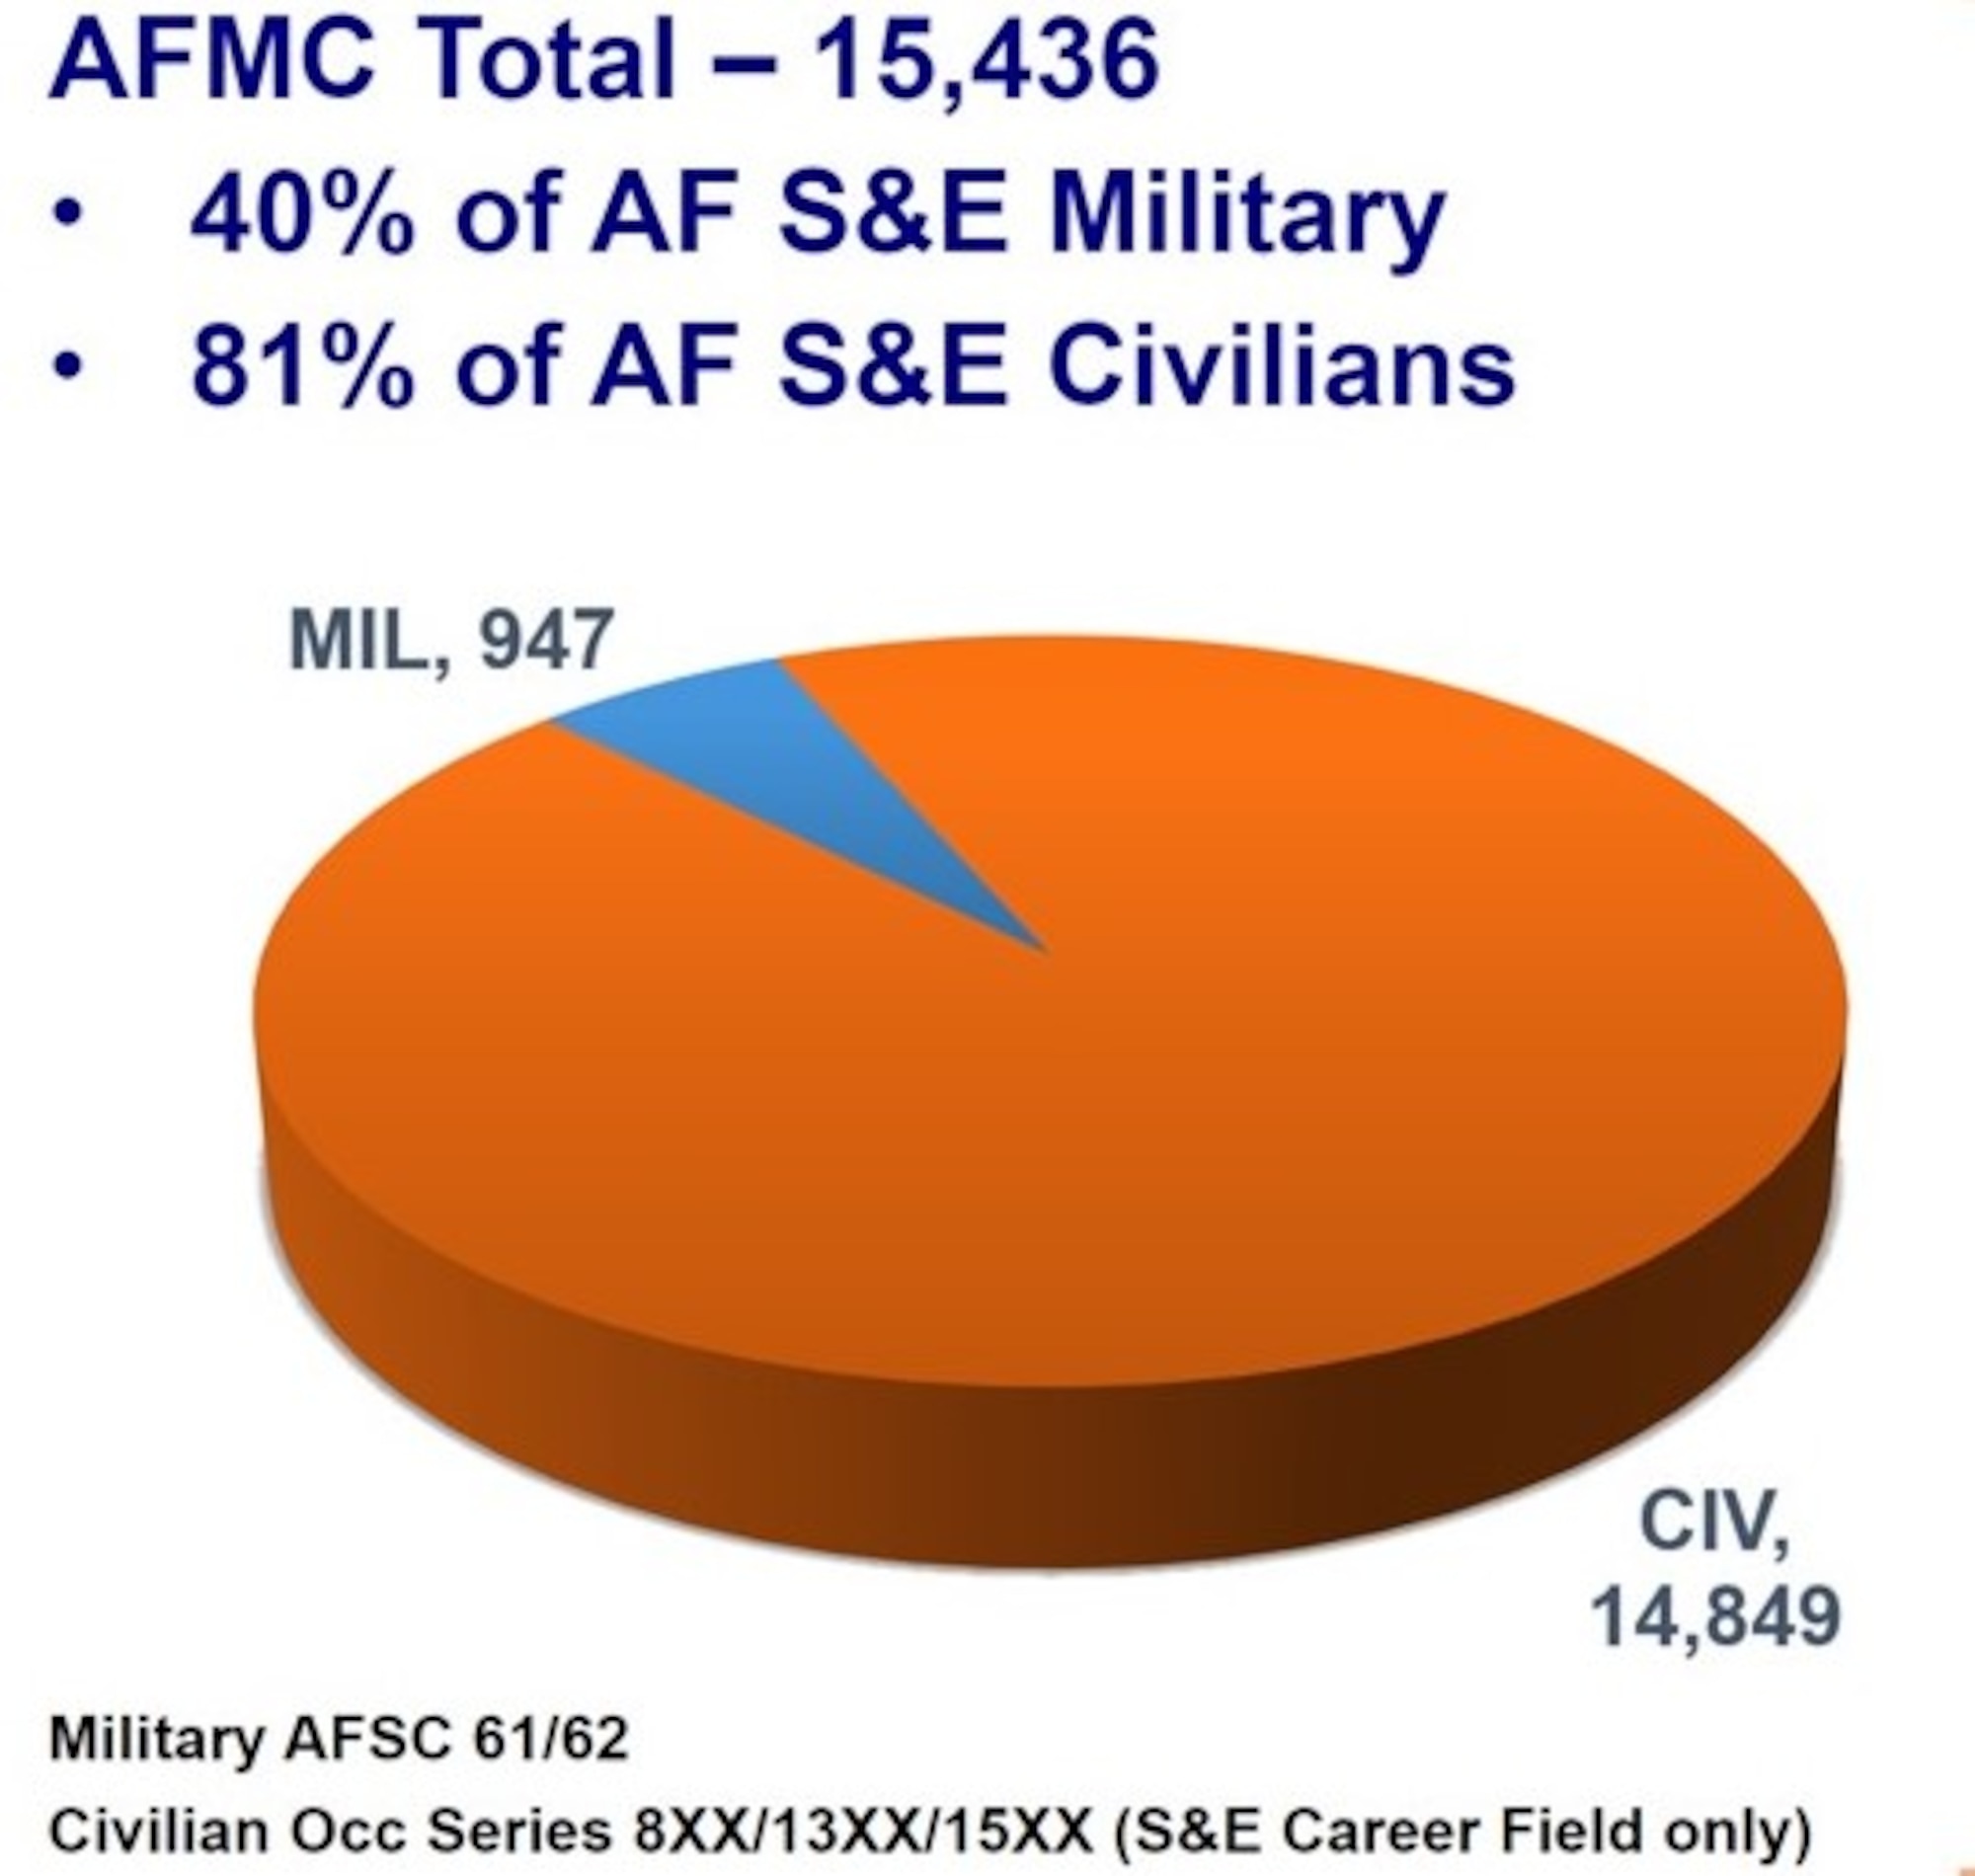 Engineers in Air Force Materiel Command total more than 15,000.Model Based Systems Engineering training is available to engineers and support personnel.